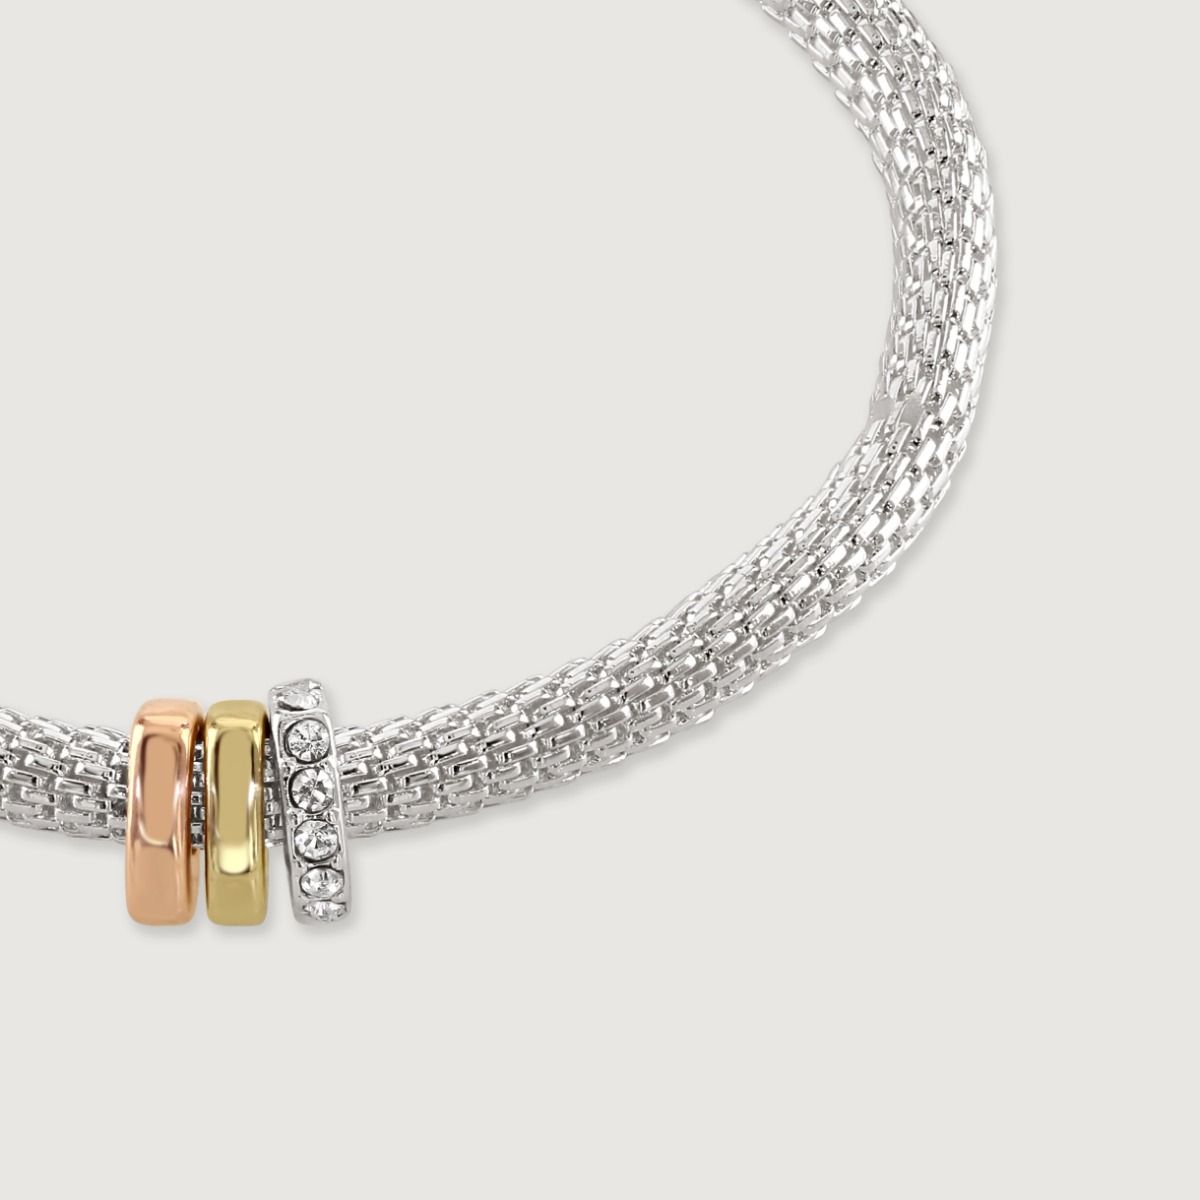 The Mesh Stretch Bracelet with Three Rondelles is a stylish and versatile piece. Featuring a mesh design that stretches for a comfortable fit, this bracelet is adorned with three rondelle hearts. The rondelles feature in gold, rose gold and silver, which 